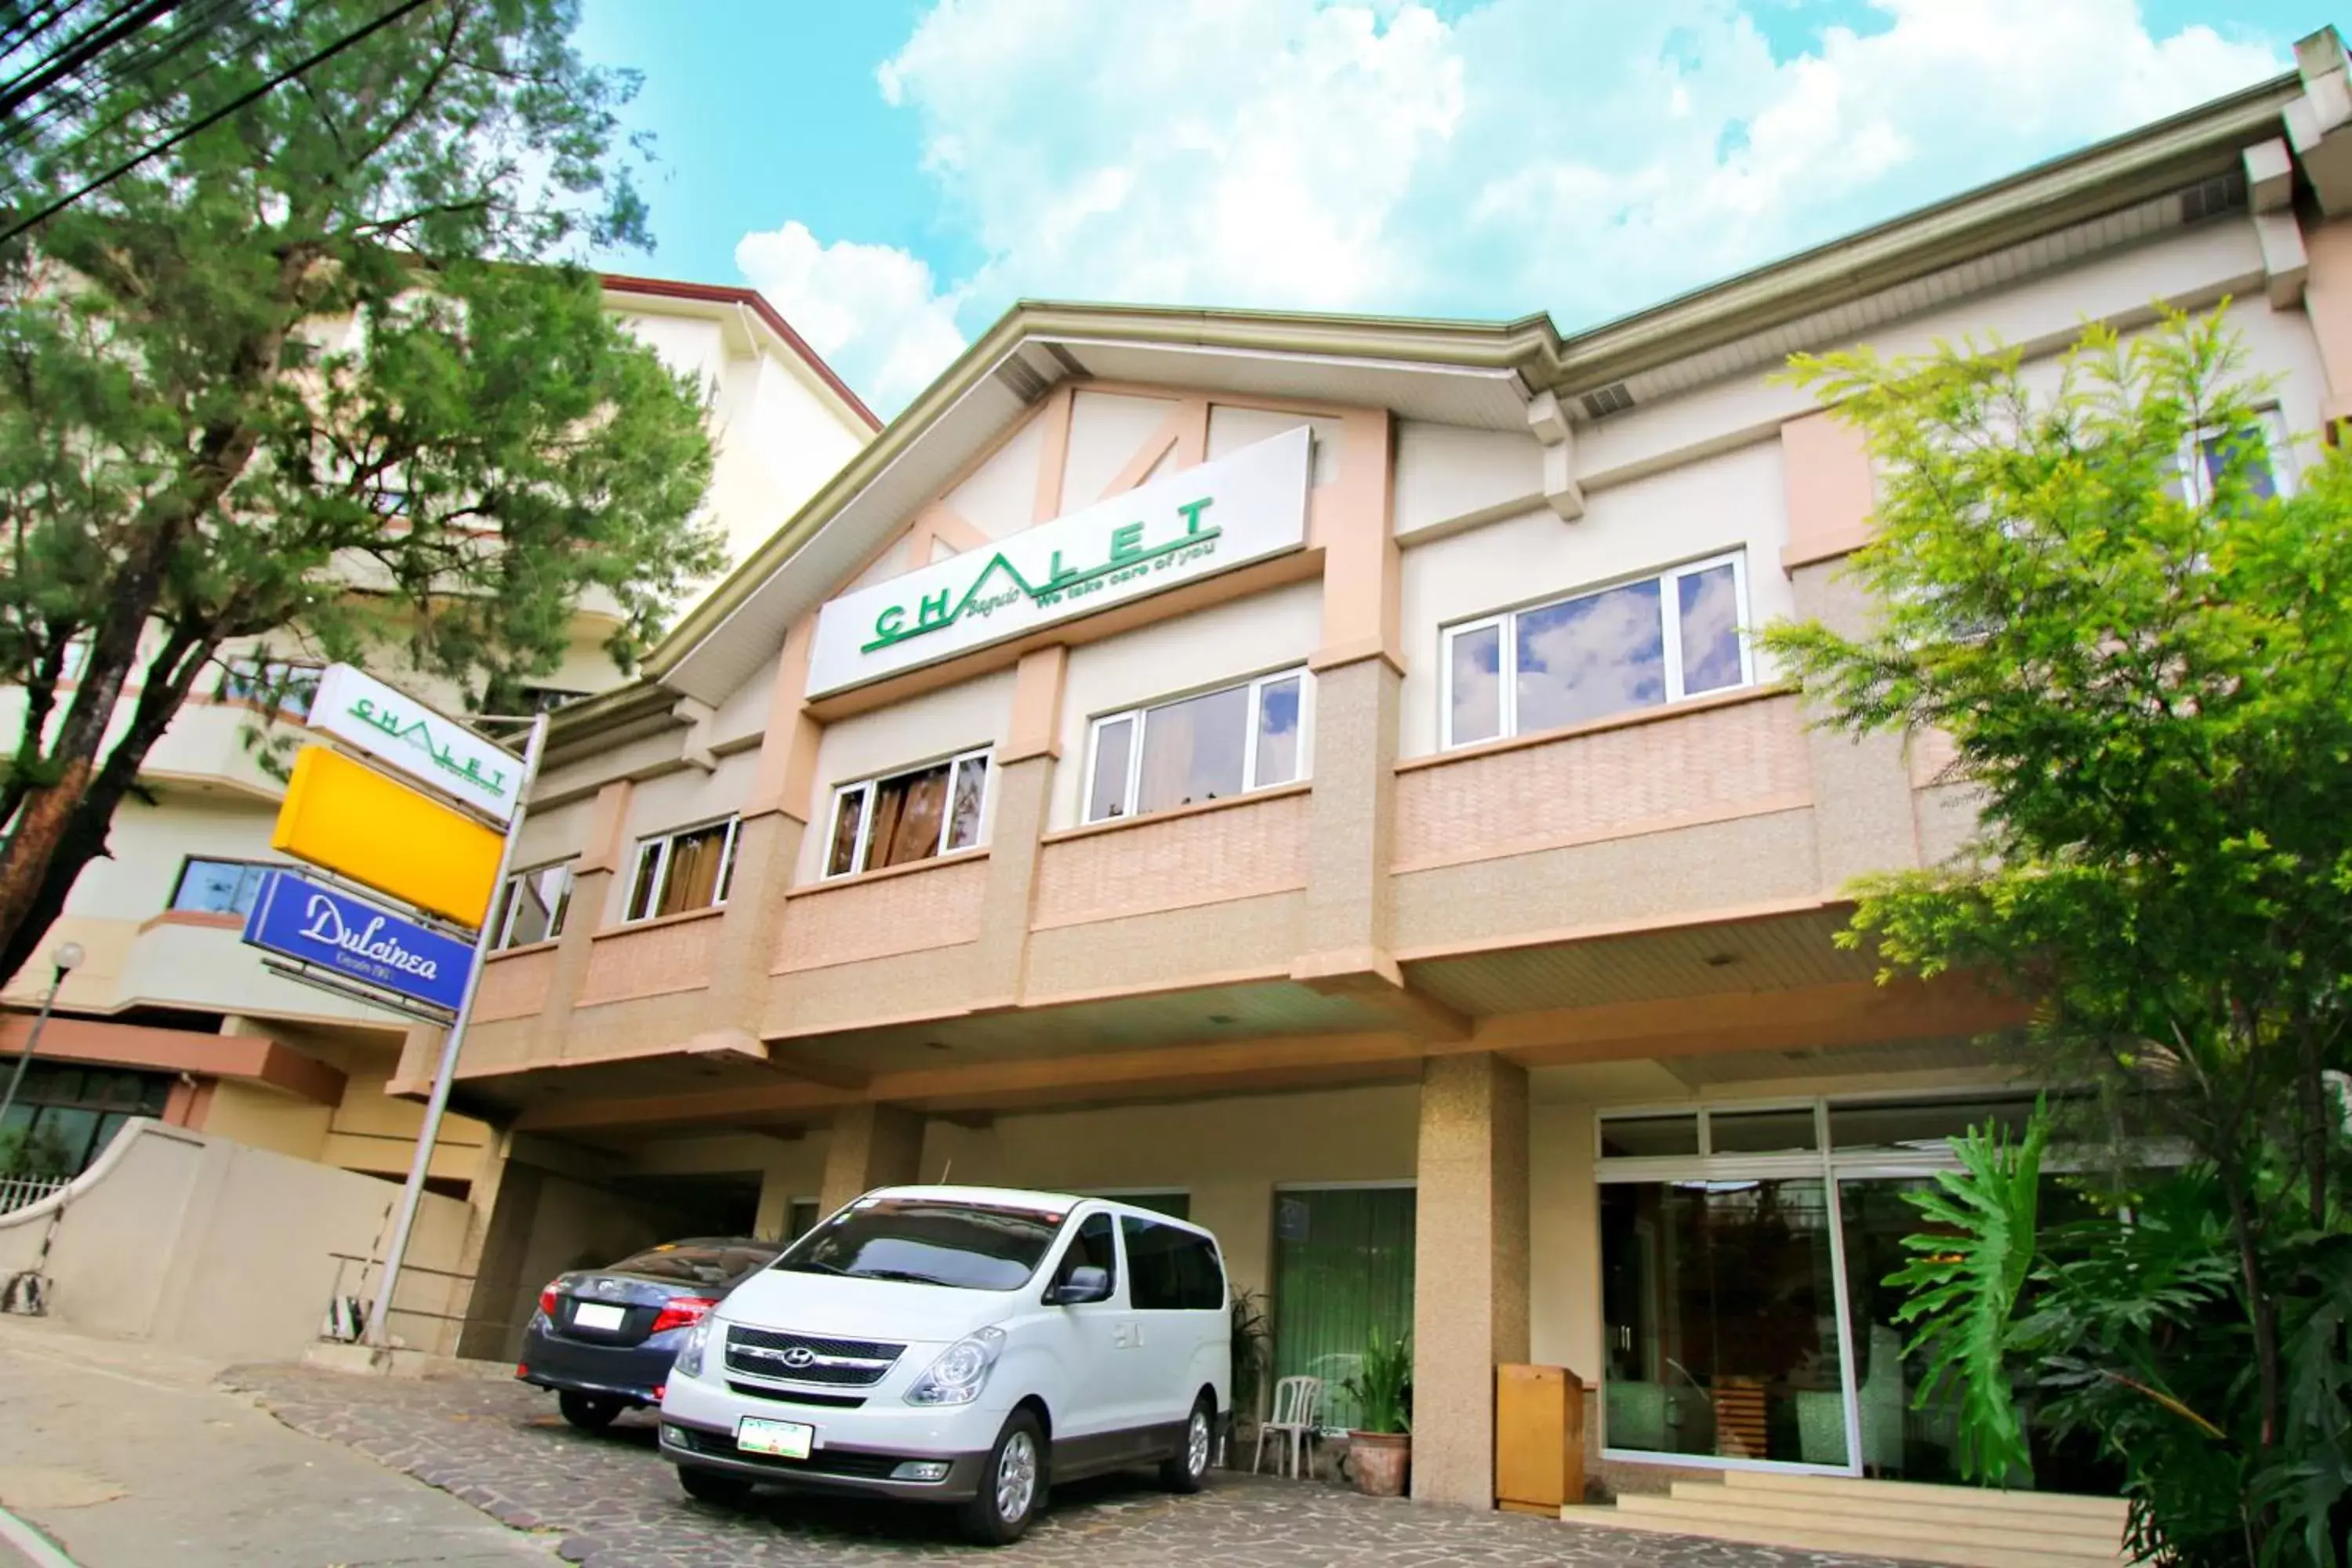 Property building in Chalet Baguio